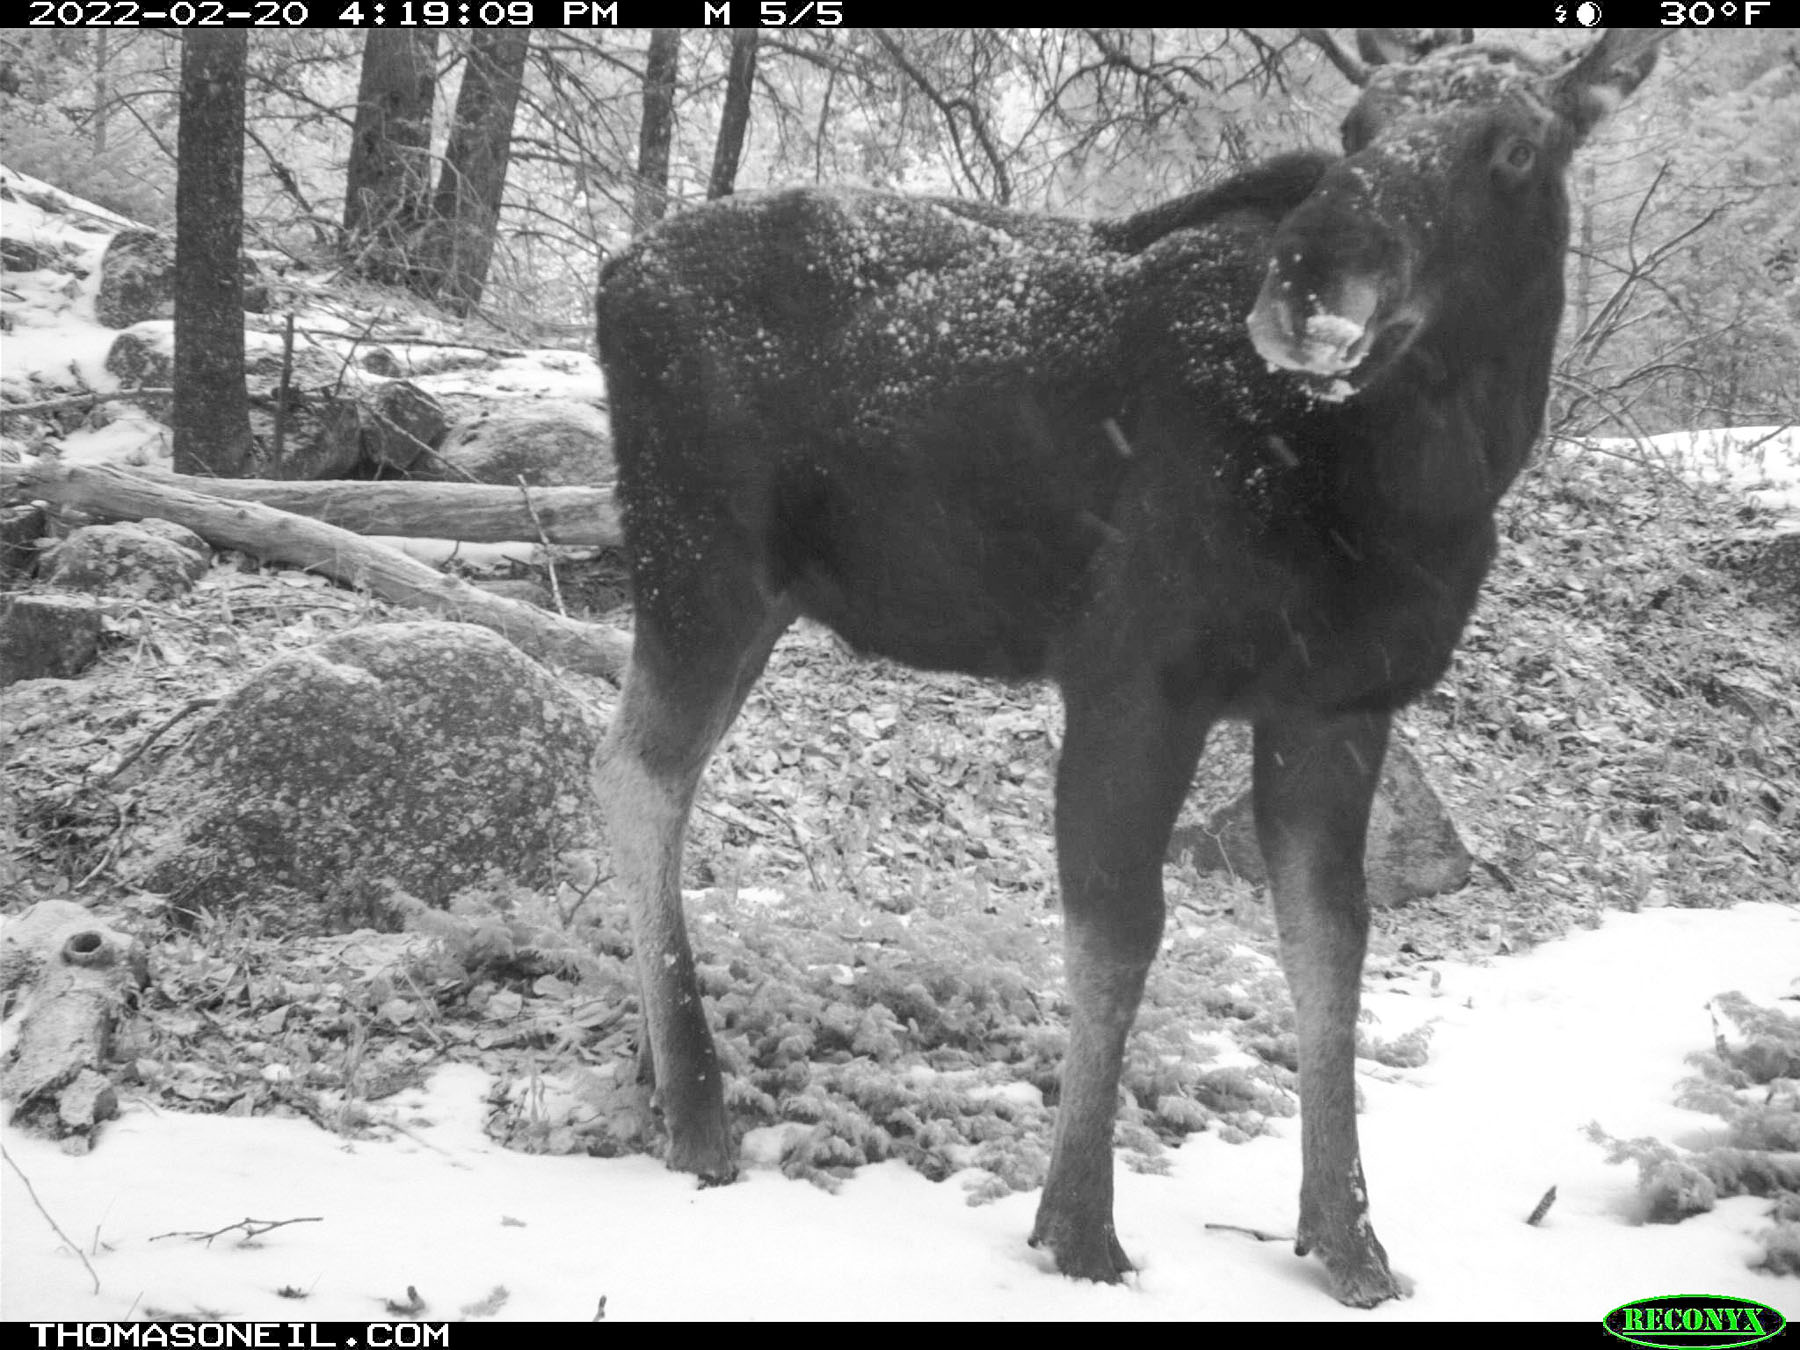 Moose on trailcam, Red Lodge, MT, February 2022.  Click for next photo.